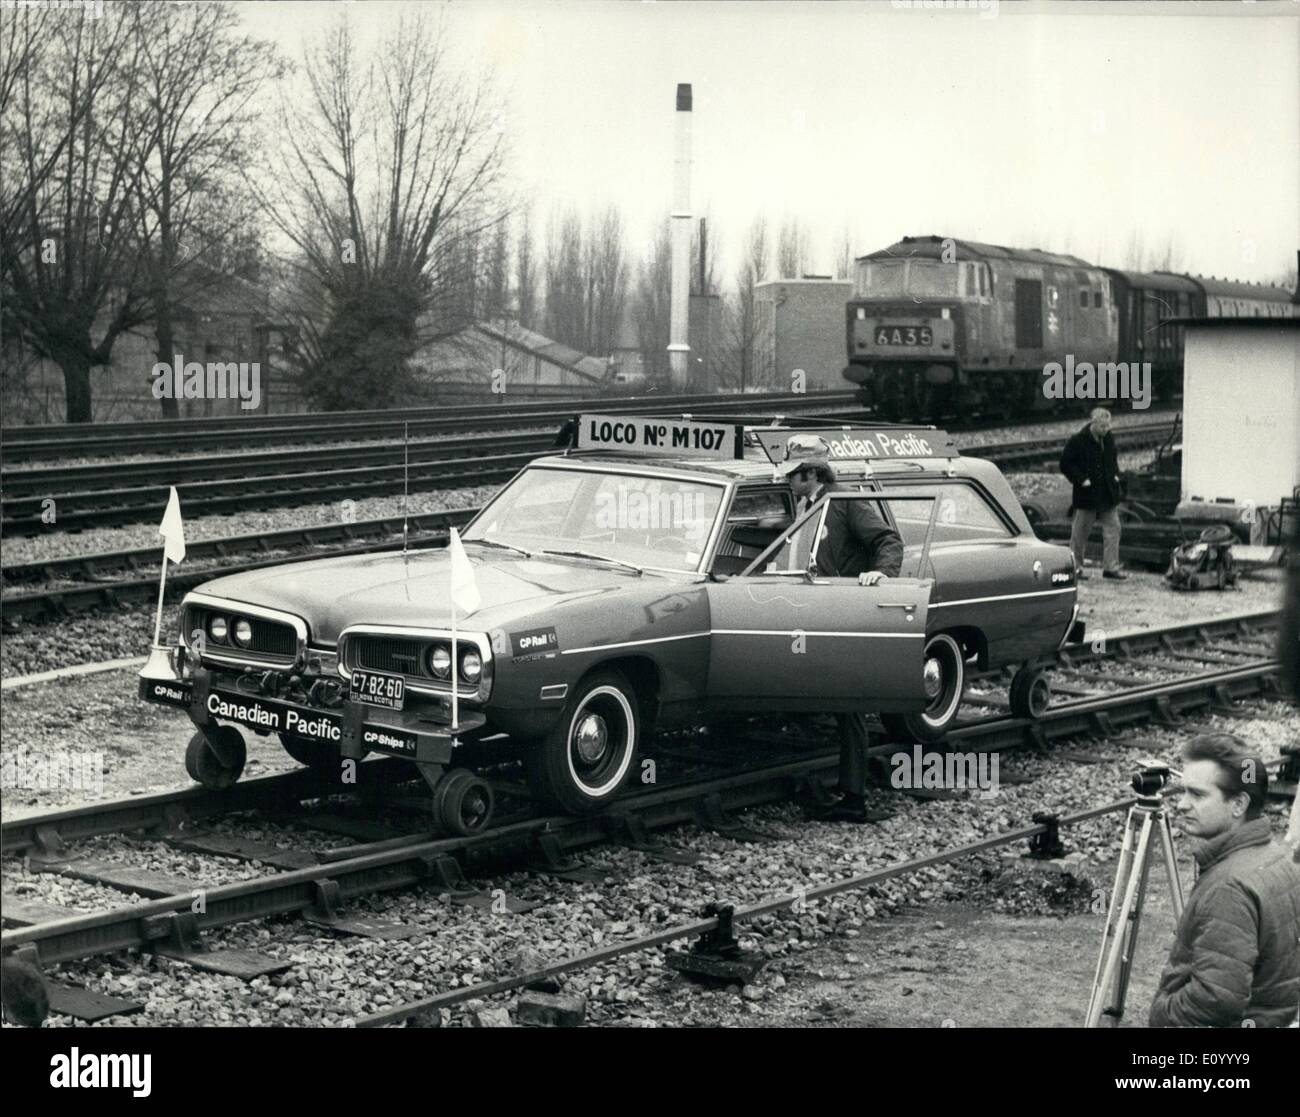 Dec. 12, 1971 - Demonstration of CP rails' Hy-Rail unit : One of the most unusual cars ever to arrive in Britain was today demonstrated at west drayton railway station. British rail kindly agreed to allow Canadian pacific railway - cp rail, to display a Hy-Rail unit, one of the most unusual items of the company's rolling stock, which it was on a brief visit to Britain. the car, of to use its official designation - hy rail unit, is in fact a typical north American estate car with one big difference - it's designed to run on railway lines as wel s roads Stock Photo